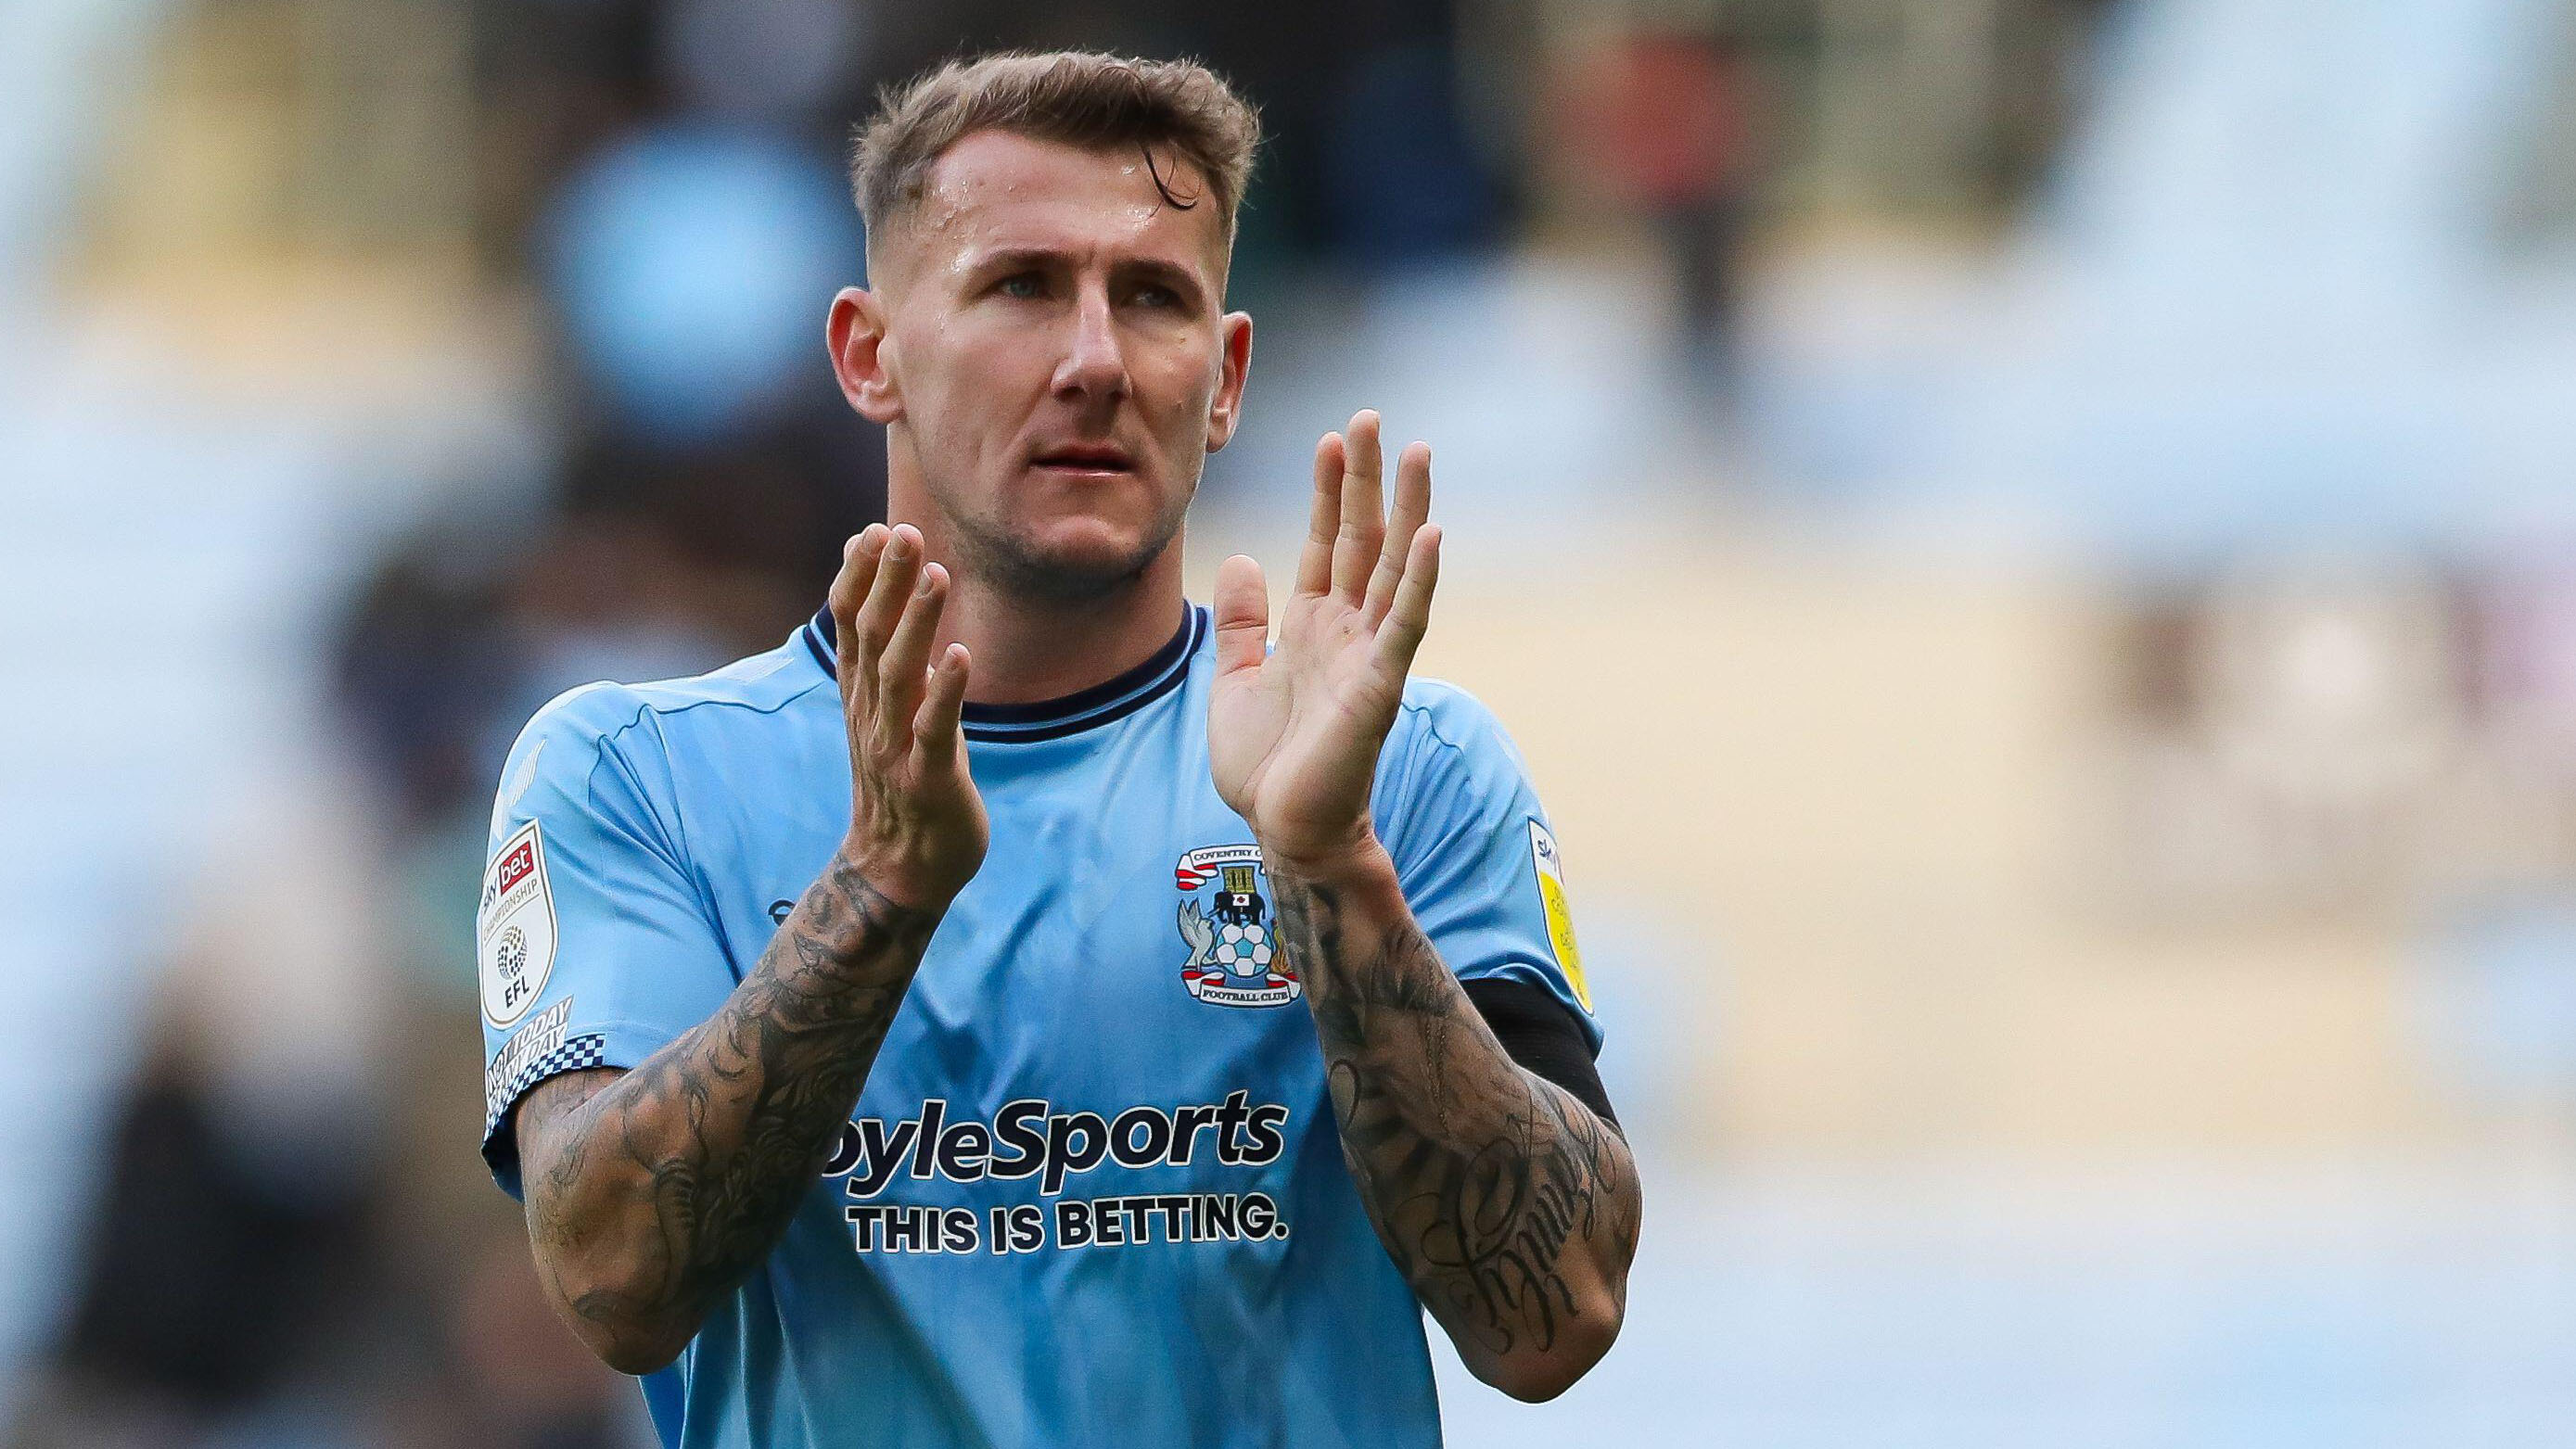 Kyle McFadzean from Coventry City claps fans